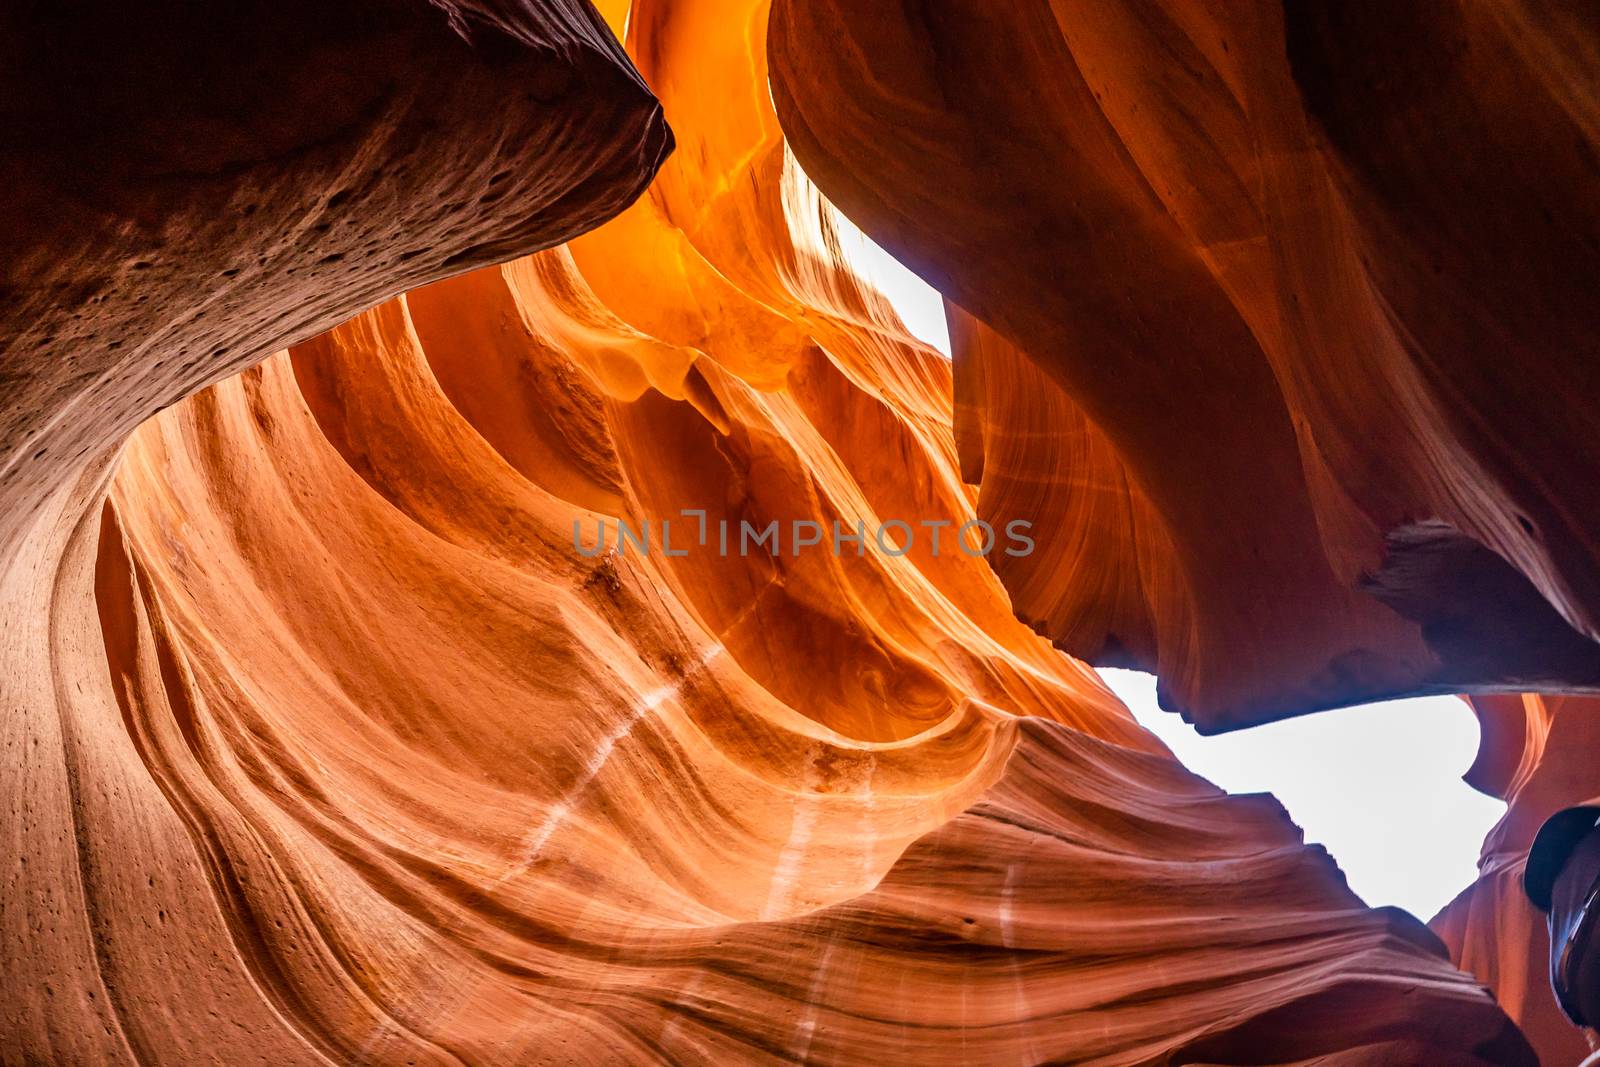 Lower Antelope Canyon by vichie81